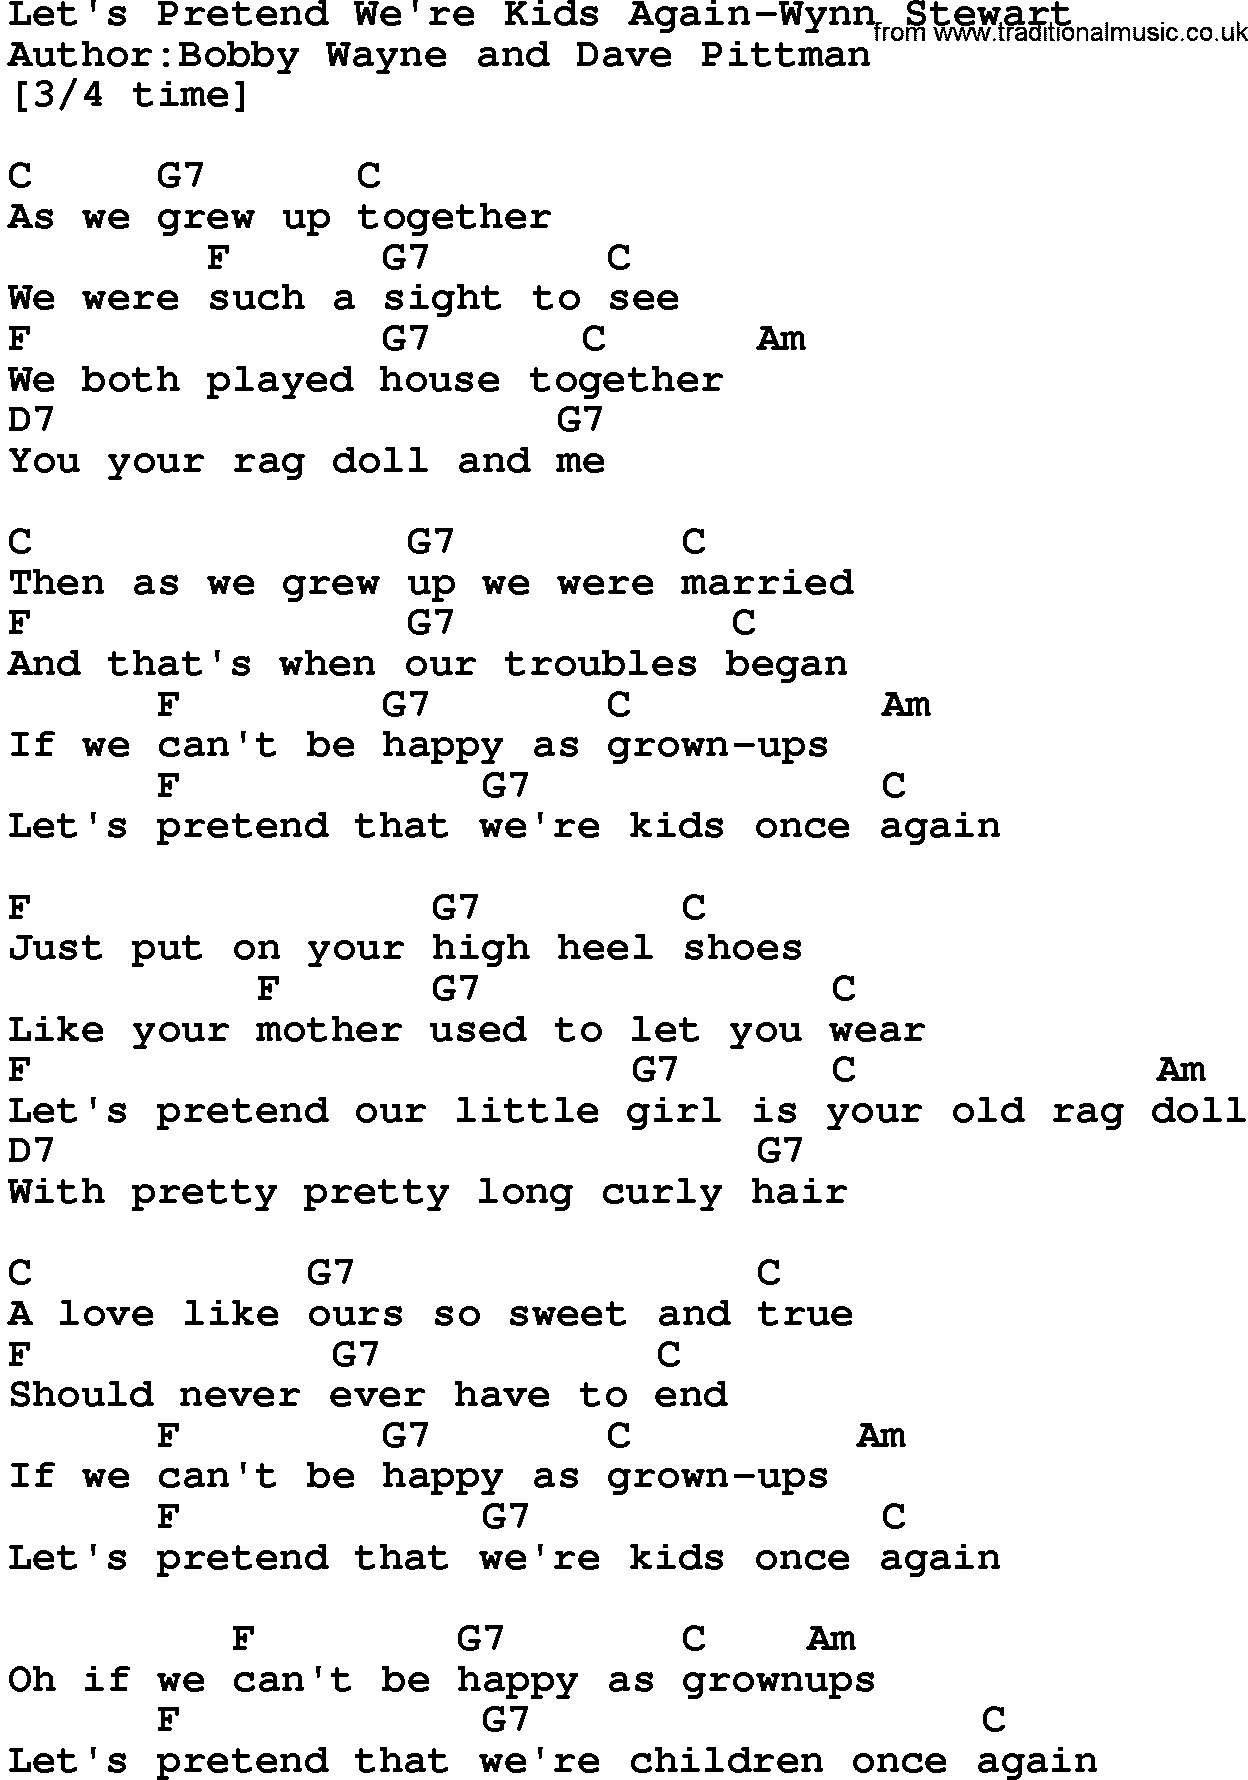 Country music song: Let's Pretend We're Kids Again-Wynn Stewart lyrics and chords